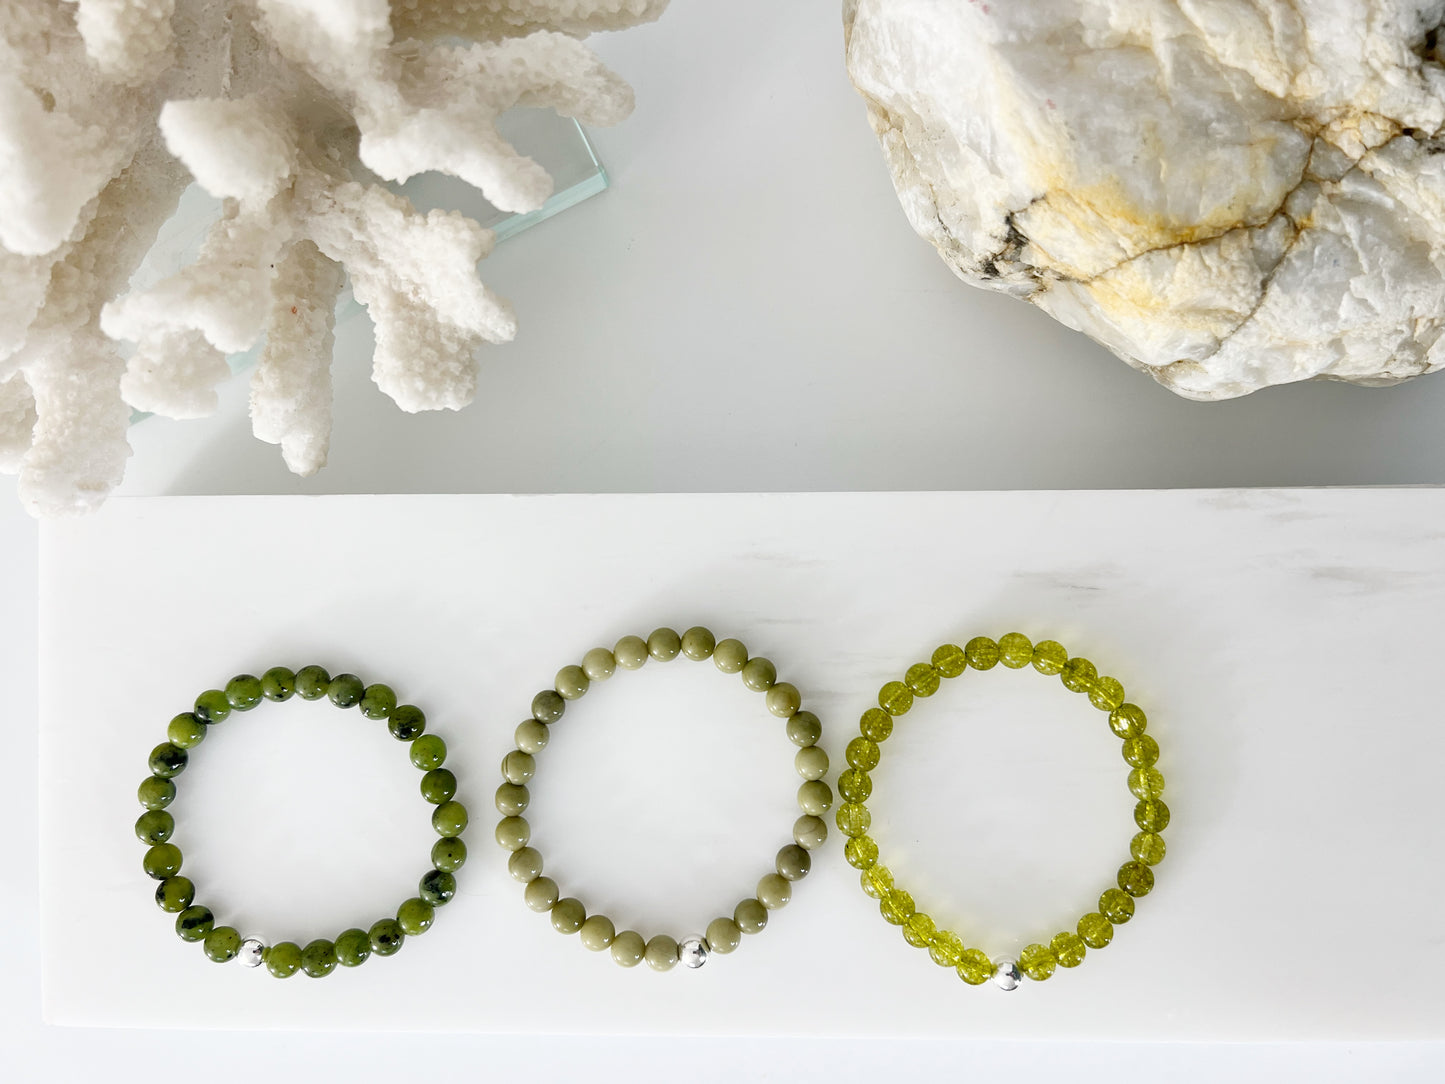 Three different stretch bracelets next to each other on a white background with white coral and a brownish rock behind them.